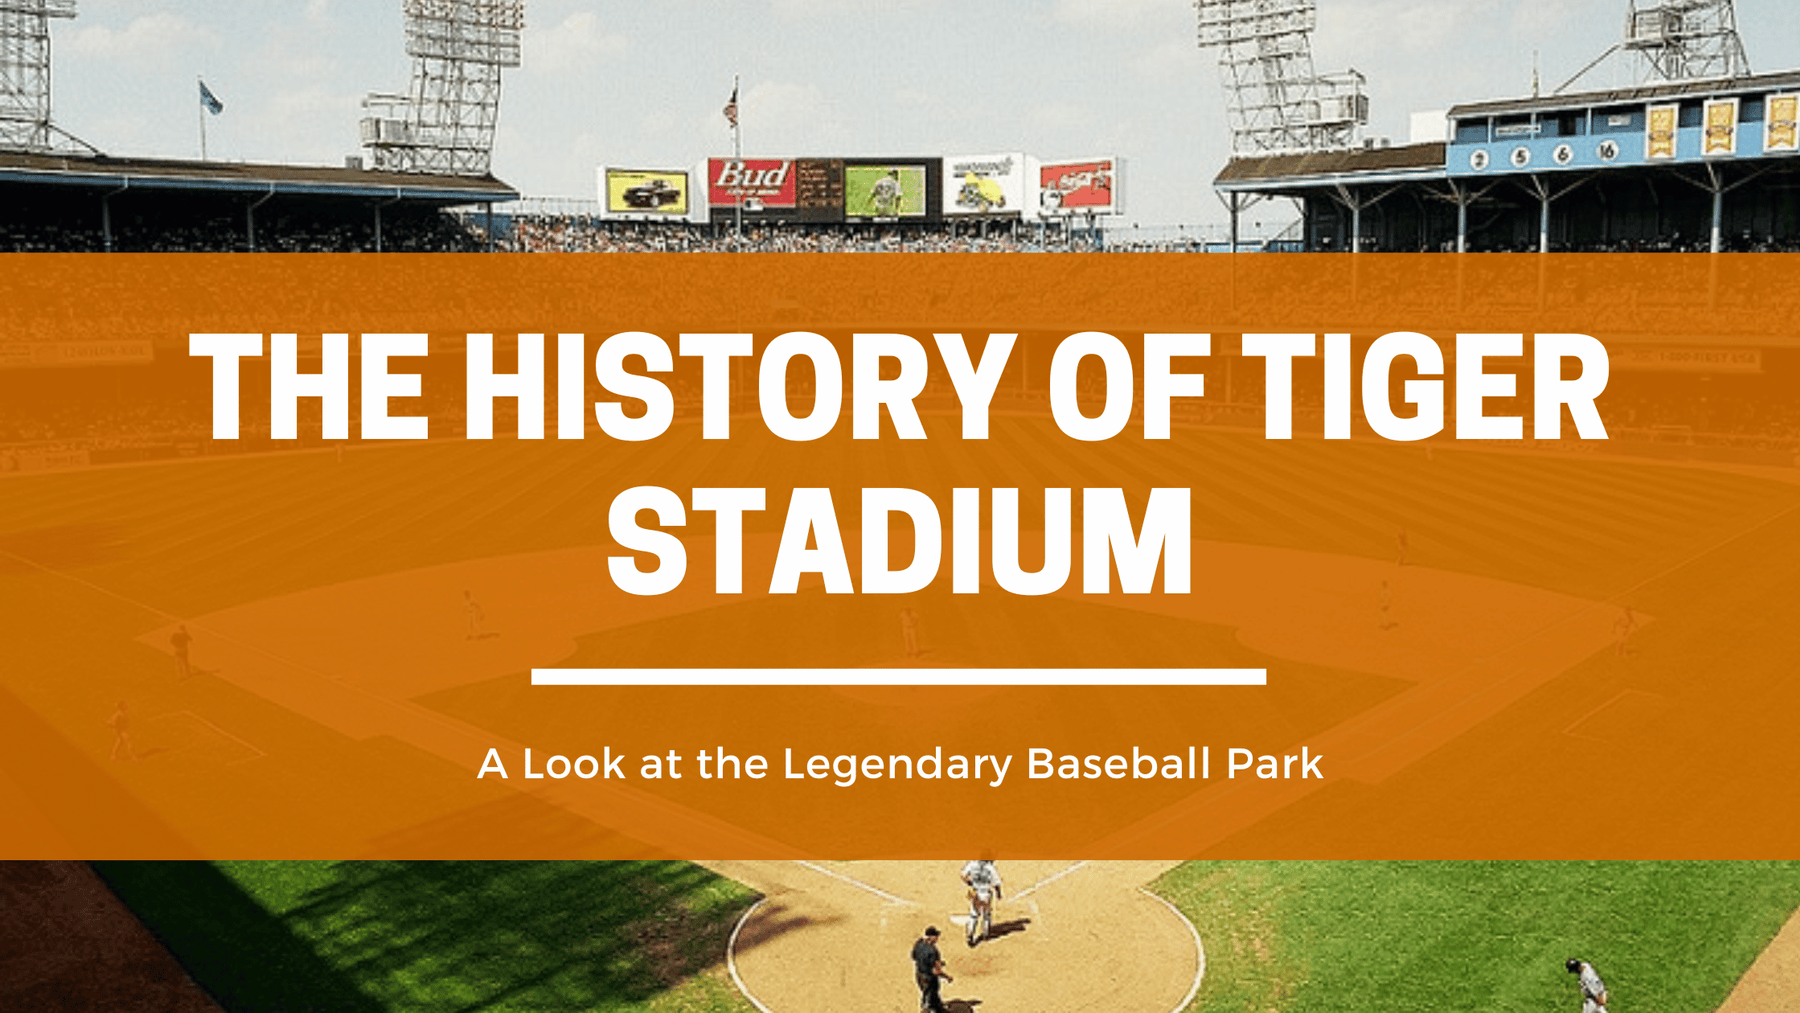 Relive the History of Tiger Stadium - The Iconic Home of the Detroit Tigers